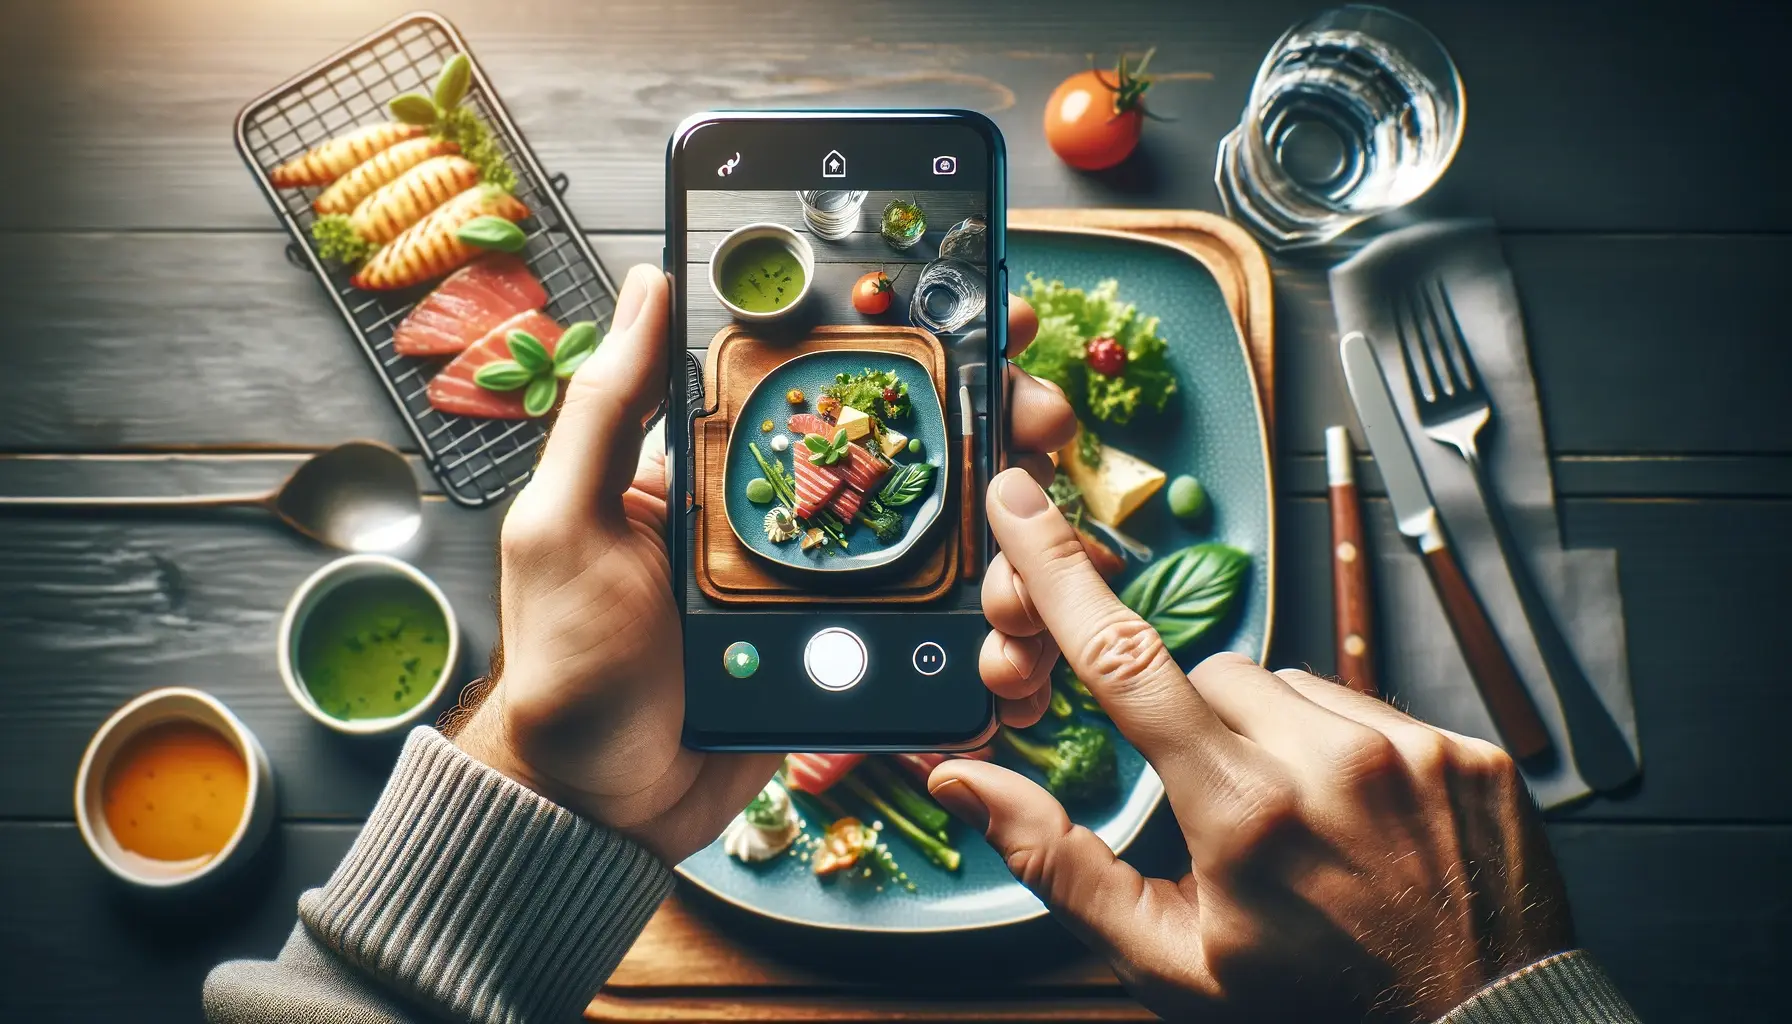 10 best android apps for food photography